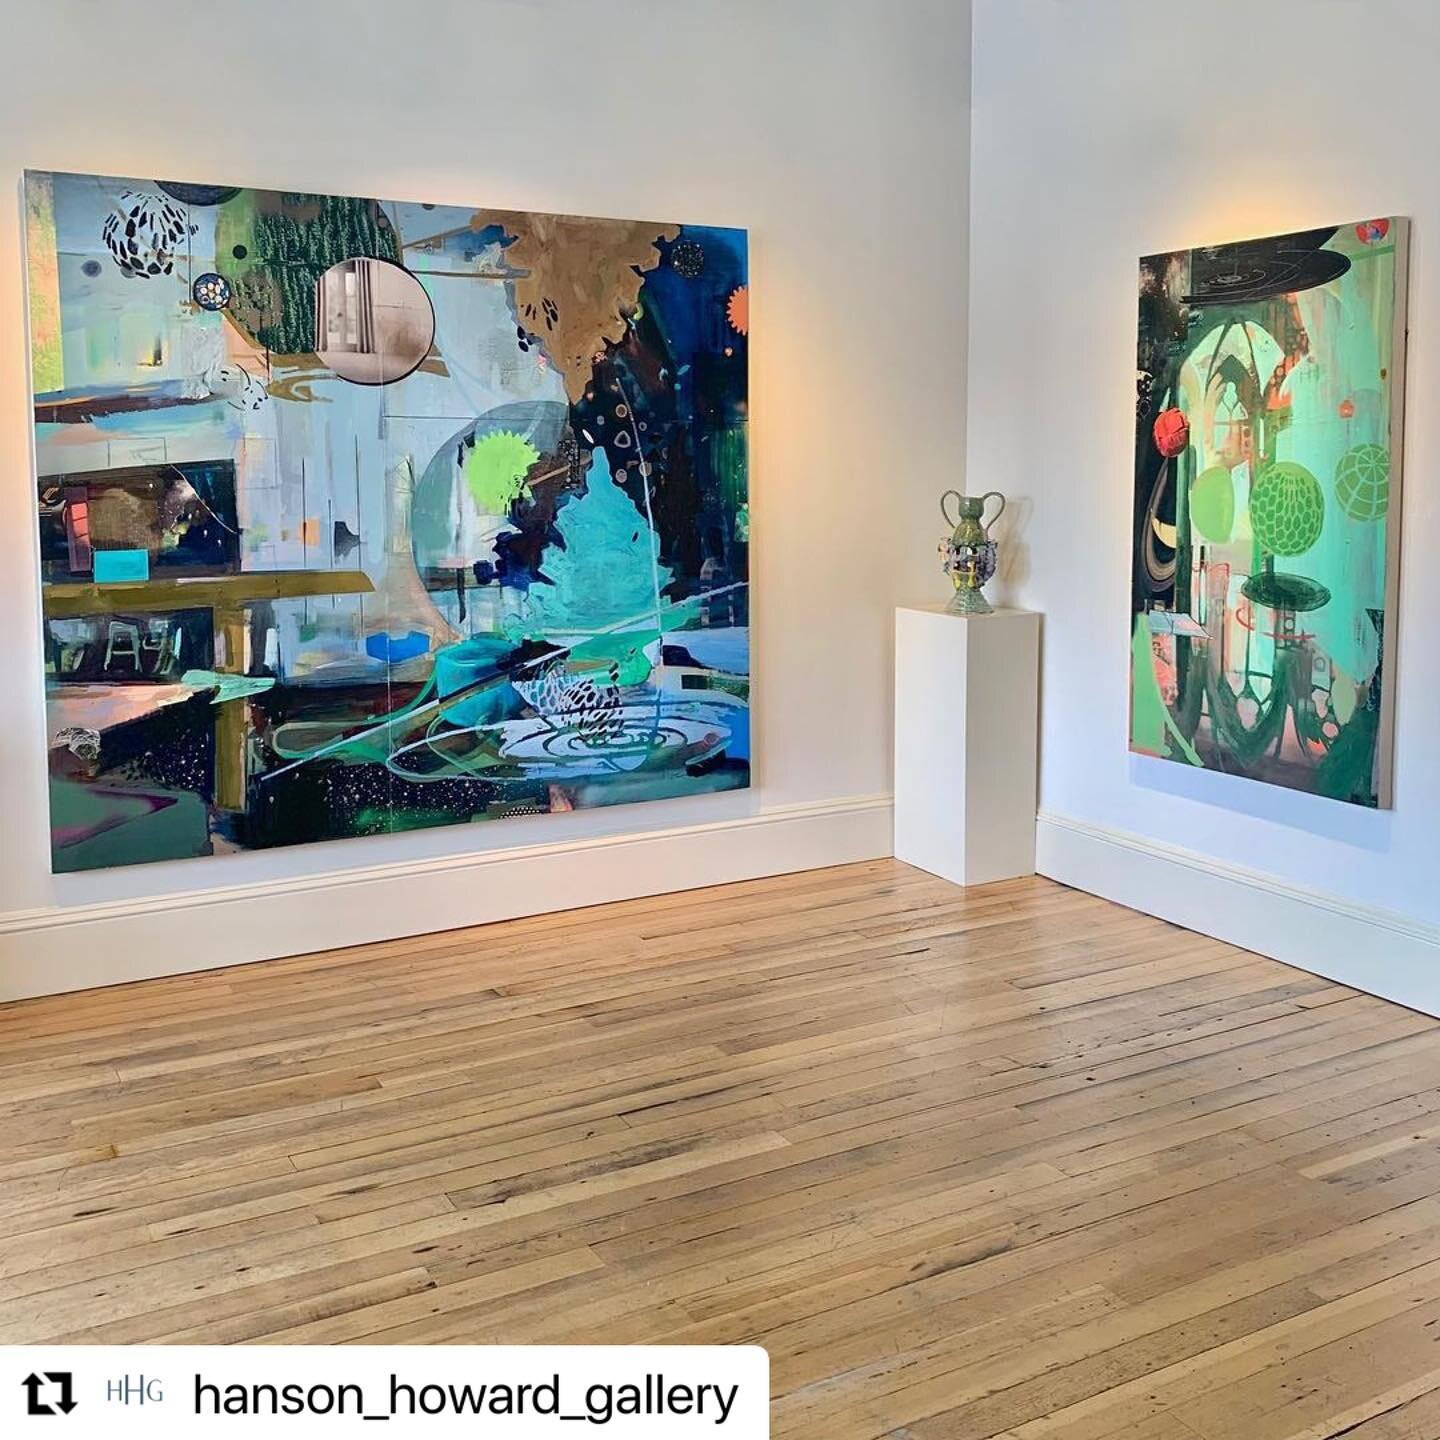 #Repost @hanson_howard_gallery 
・・・
In the Studio :: Emily Somoskey 

As a mixed media artist and painter, Emily's work gives form to the complexity, instability, and enigmatic nature of our lived experiences. Through the use of recognizable structur